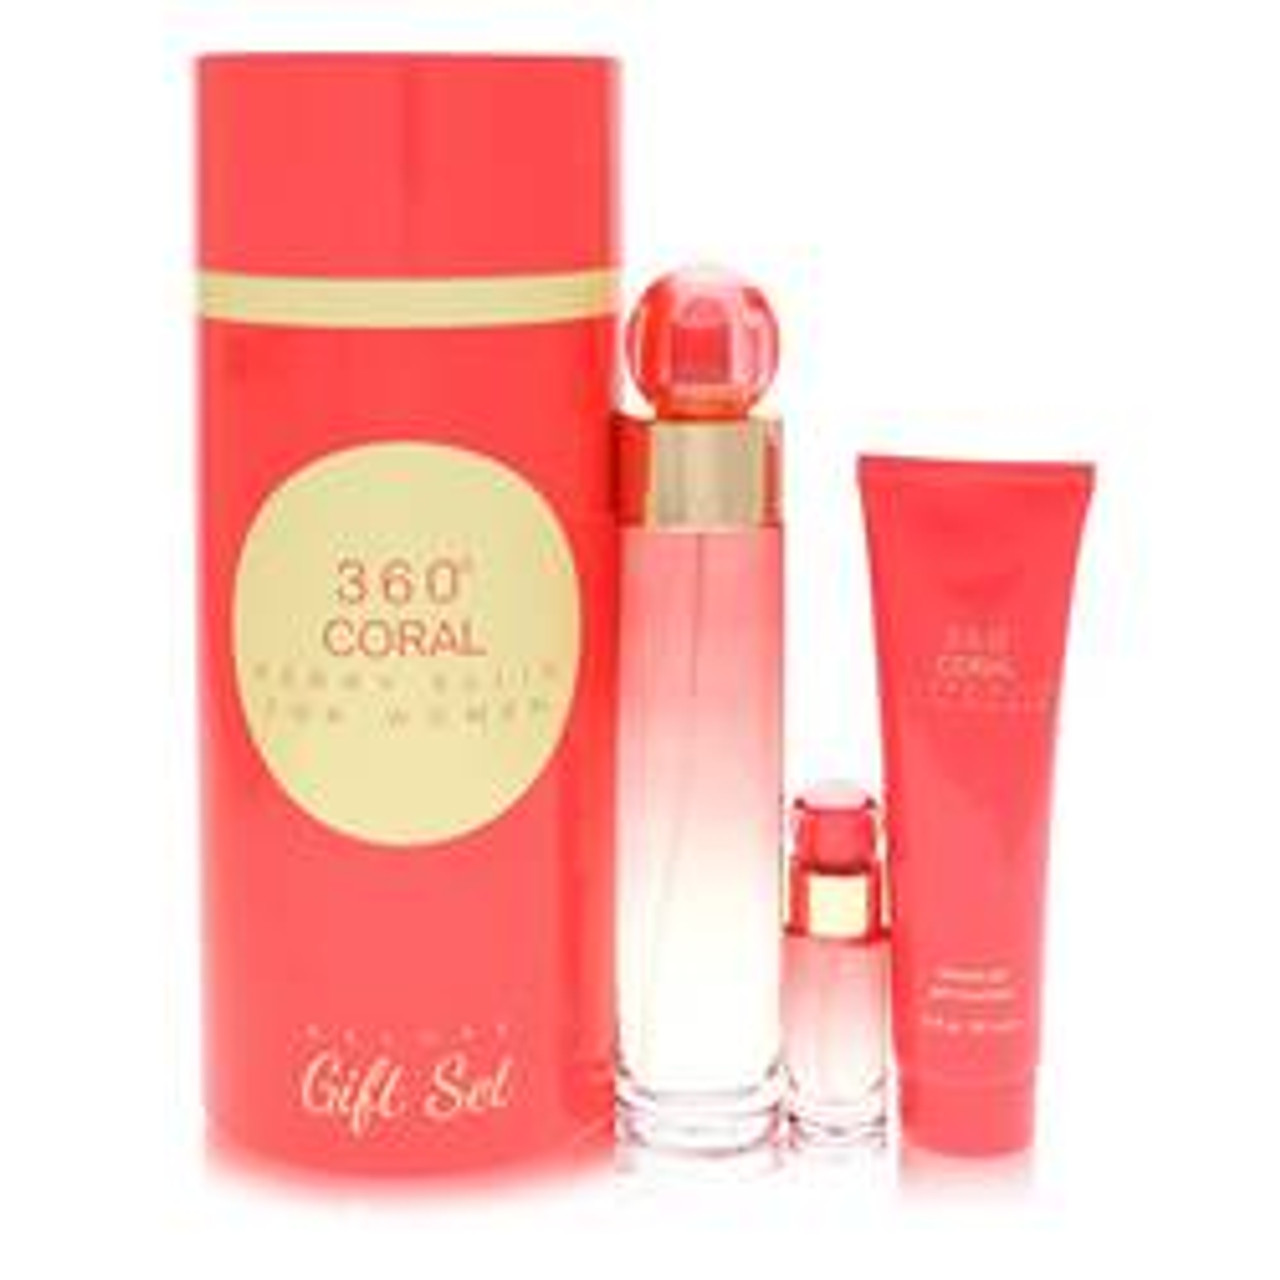 Perry Ellis 360 Coral Perfume By Perry Ellis Gift Set 3.4 oz for Women - [From 140.00 - Choose pk Qty ] - *Ships from Miami